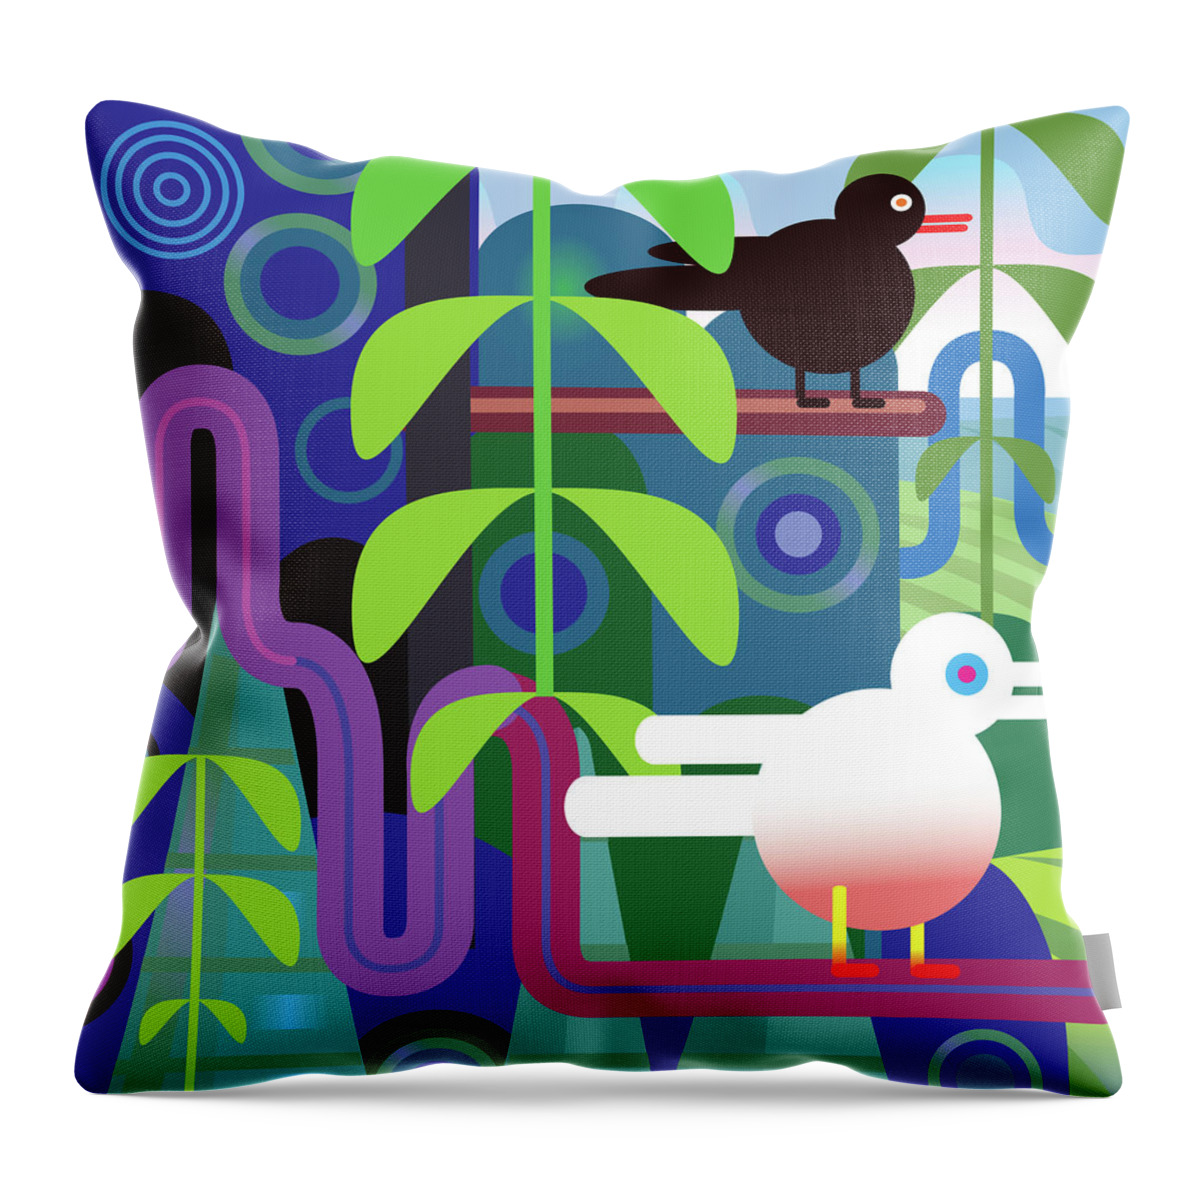 Pets Throw Pillow featuring the digital art Jungle Vector Illustration With Birds by Charles Harker